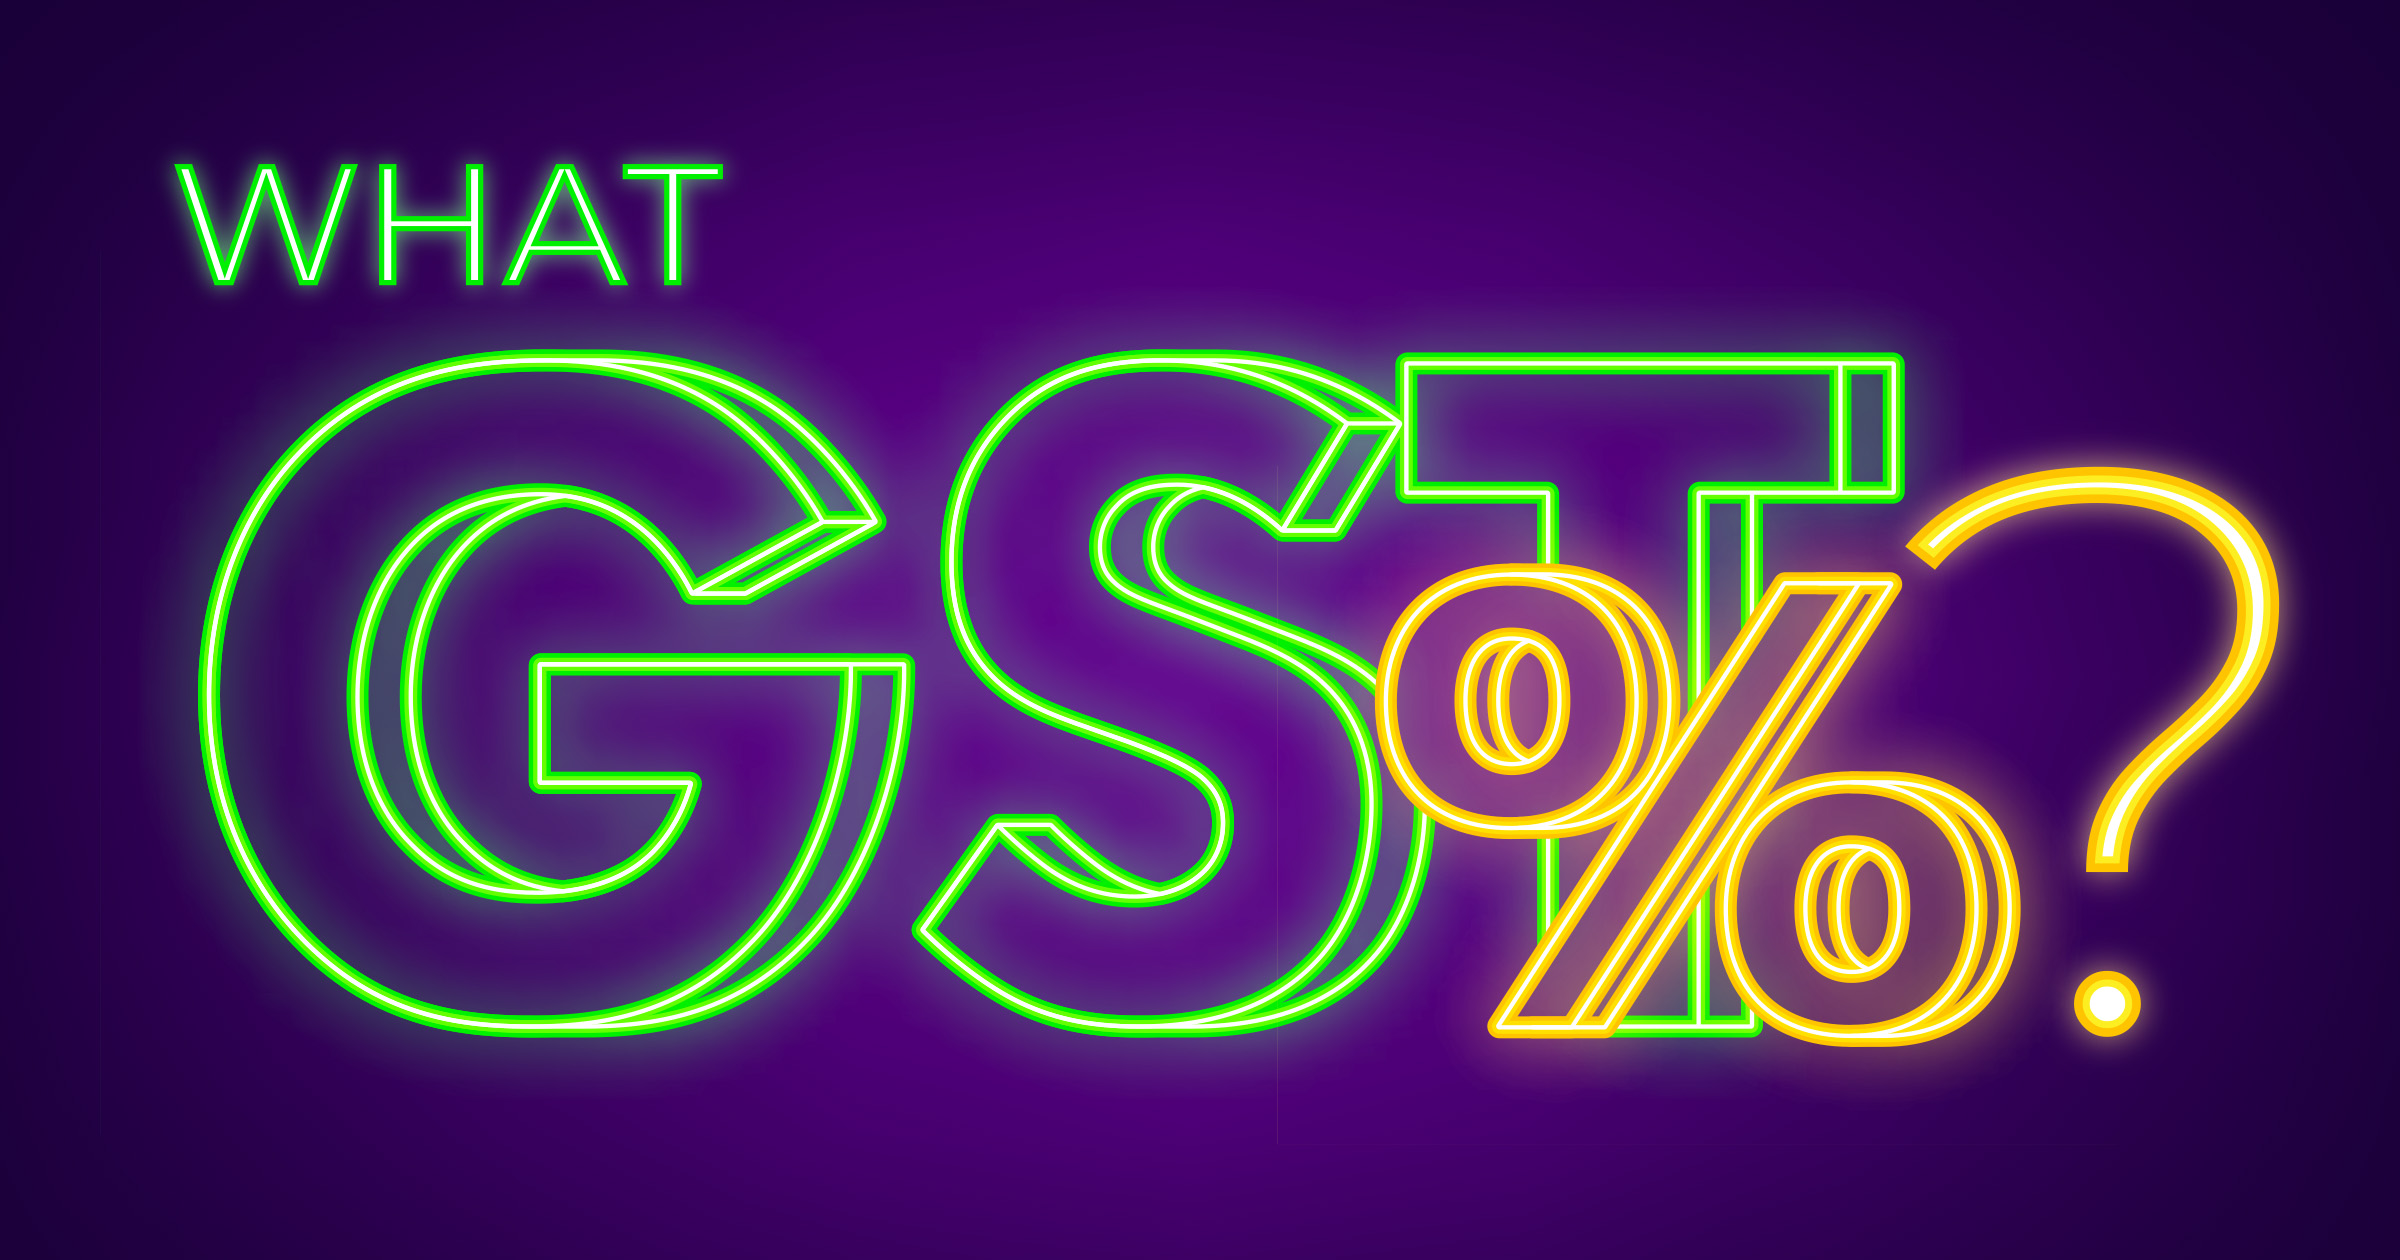 Don’t worry about higher GST – most Singaporeans are not going to really pay it